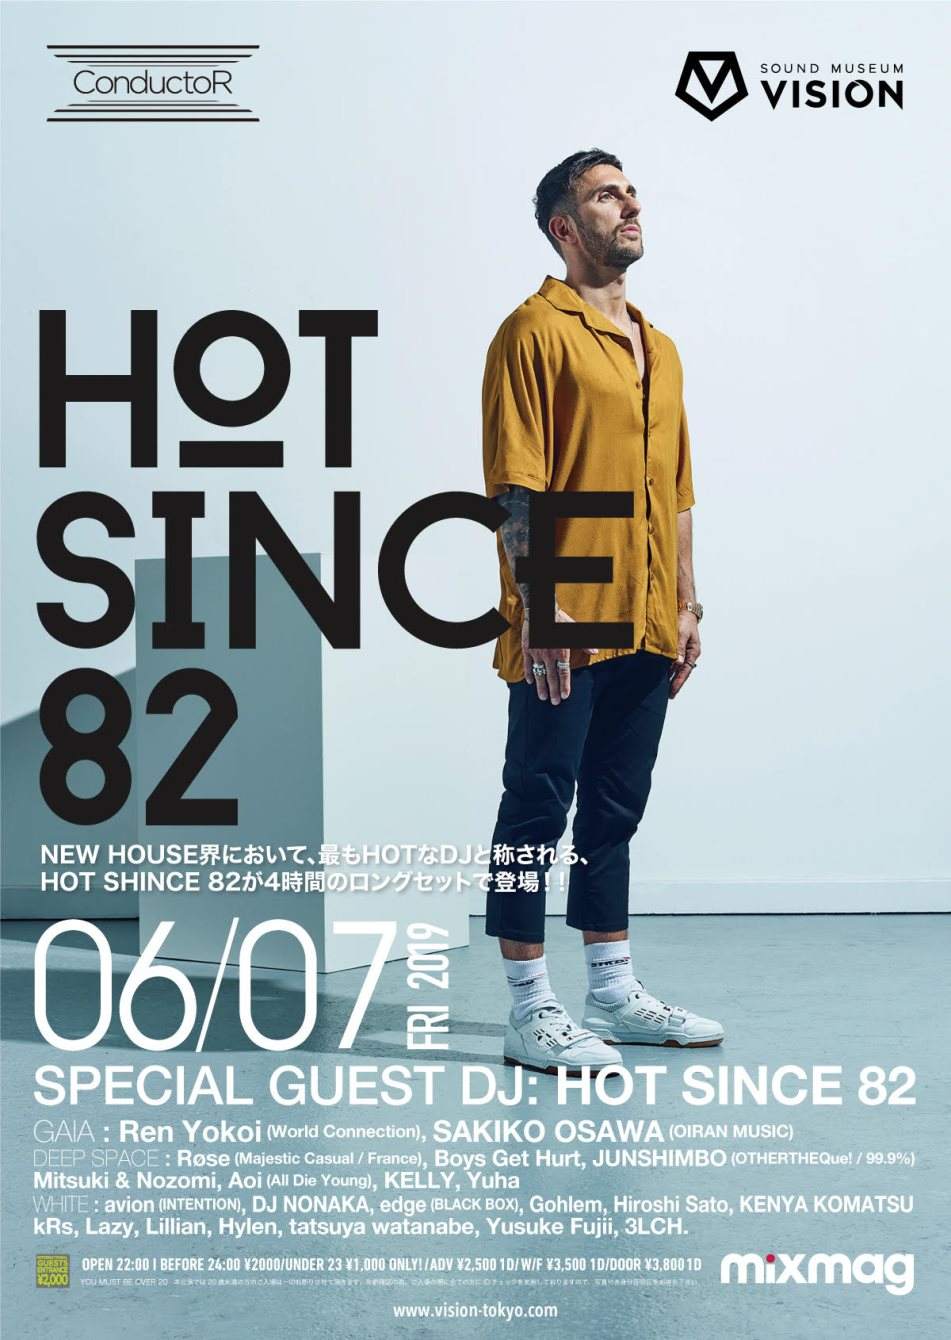 Conductor Feat. HOT Since 82 (4hrs set) - フライヤー表